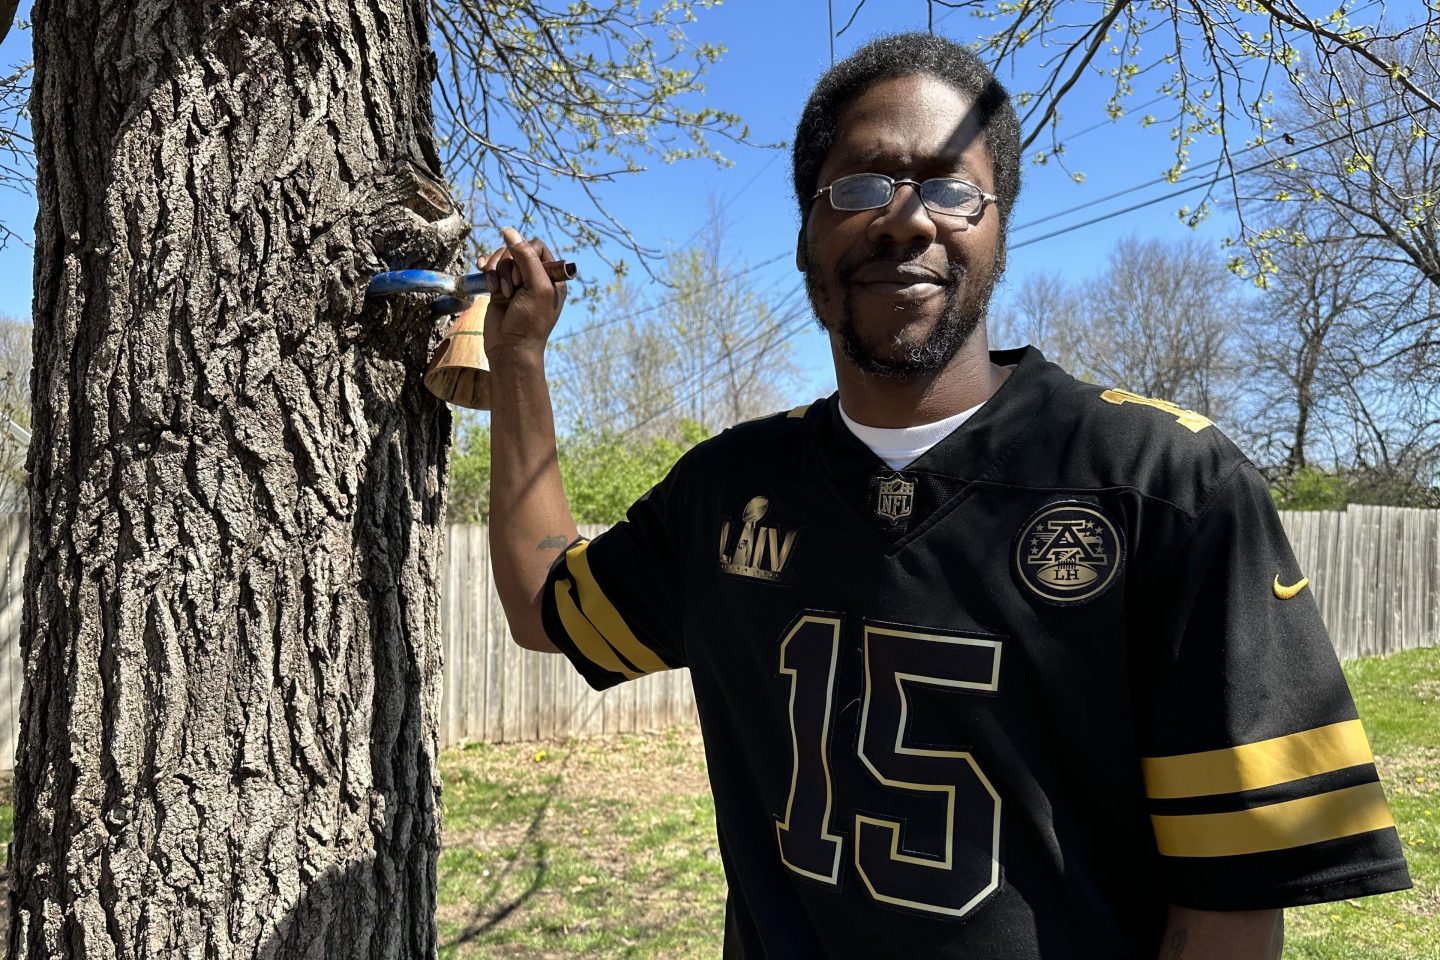 After being shot in the leg at the Kansas City Chiefs Super Bowl parade, James Lemons was initially told the bullet would stay there, unless it became a problem. “I get it, but I don&#8217;t like that,” Lemons says. “Why wouldn’t you take it out if you could?” (Bram Sable-Smith/KFF Health News)